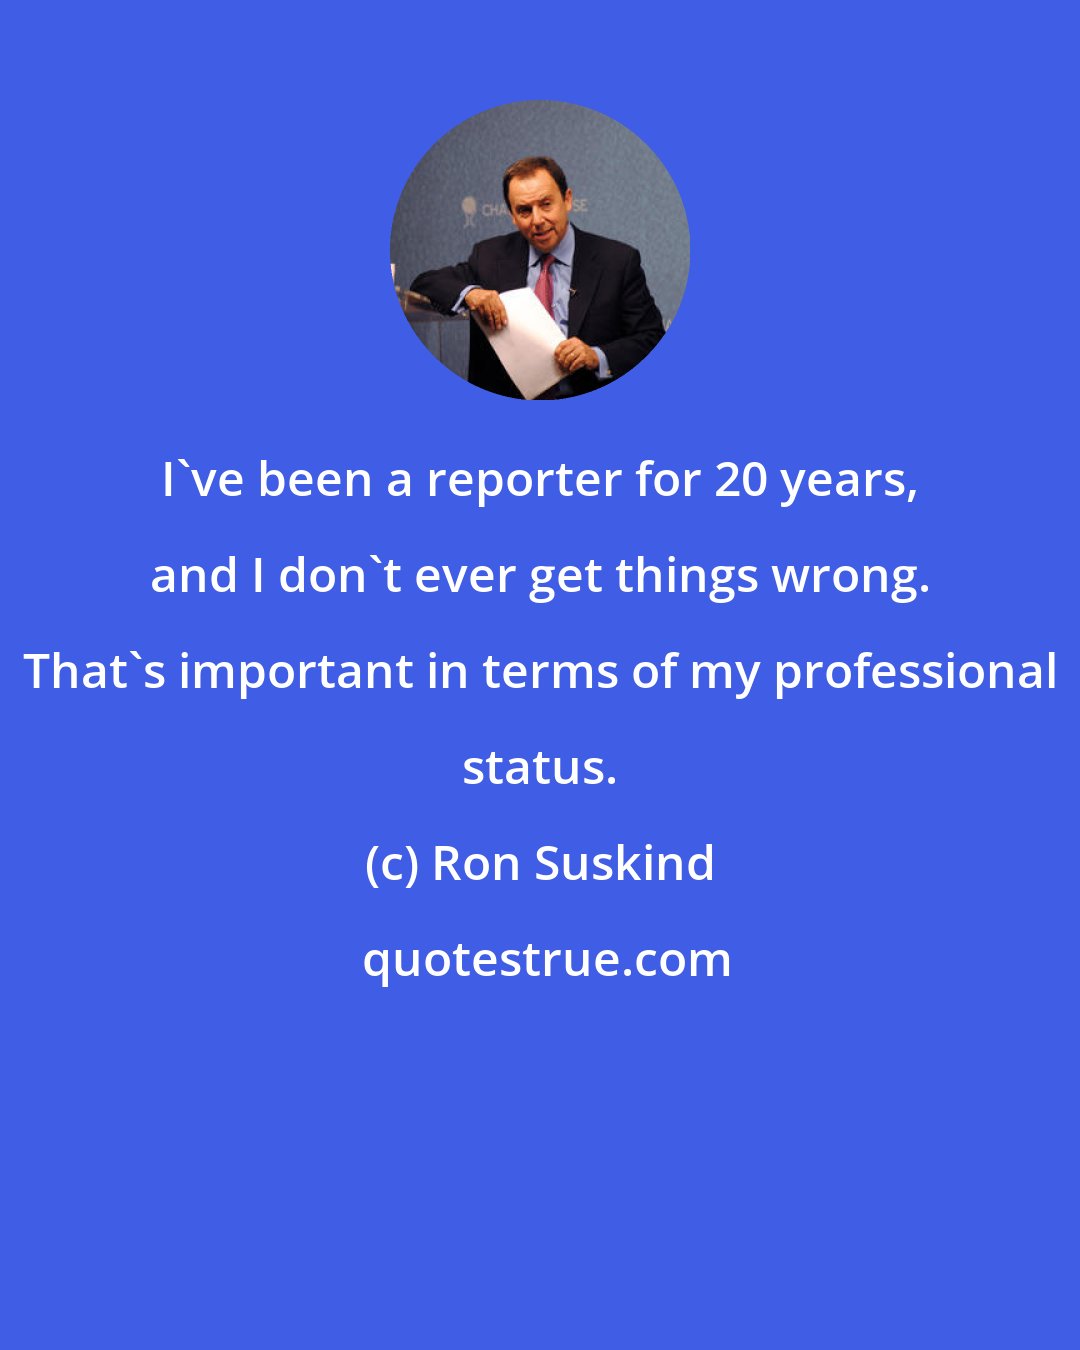 Ron Suskind: I've been a reporter for 20 years, and I don't ever get things wrong. That's important in terms of my professional status.